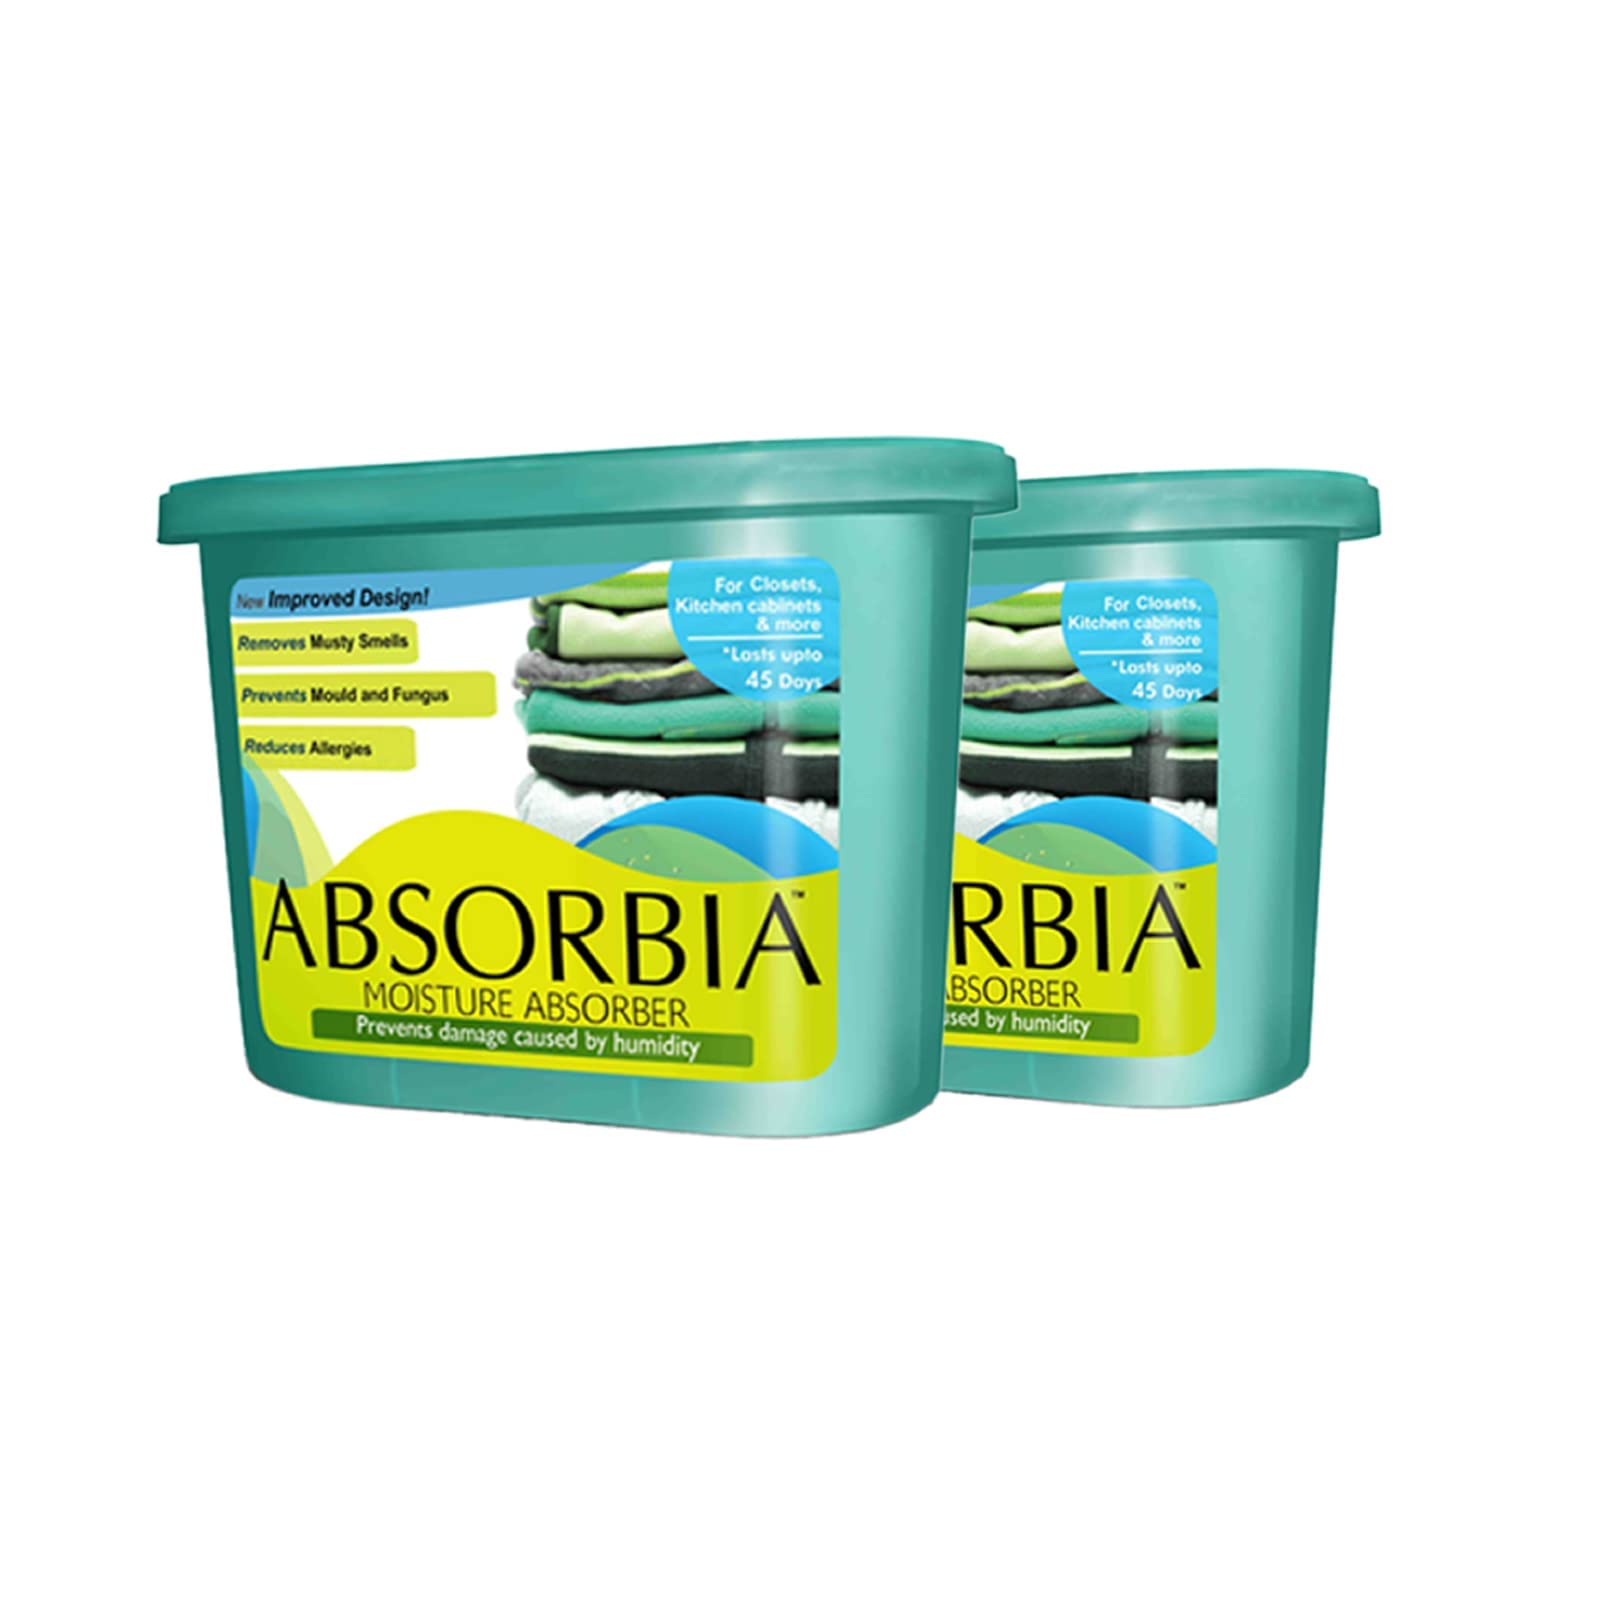 Absorbia Moisture Absorber Classic - Pack of 2 |ABSORBIA ROOM FRESHNER SPARAY 200 ml - with Frag. Tube Rose |Absorbia To da loo Pre Toilet Spray, 50 ml -with Frag. Balsam